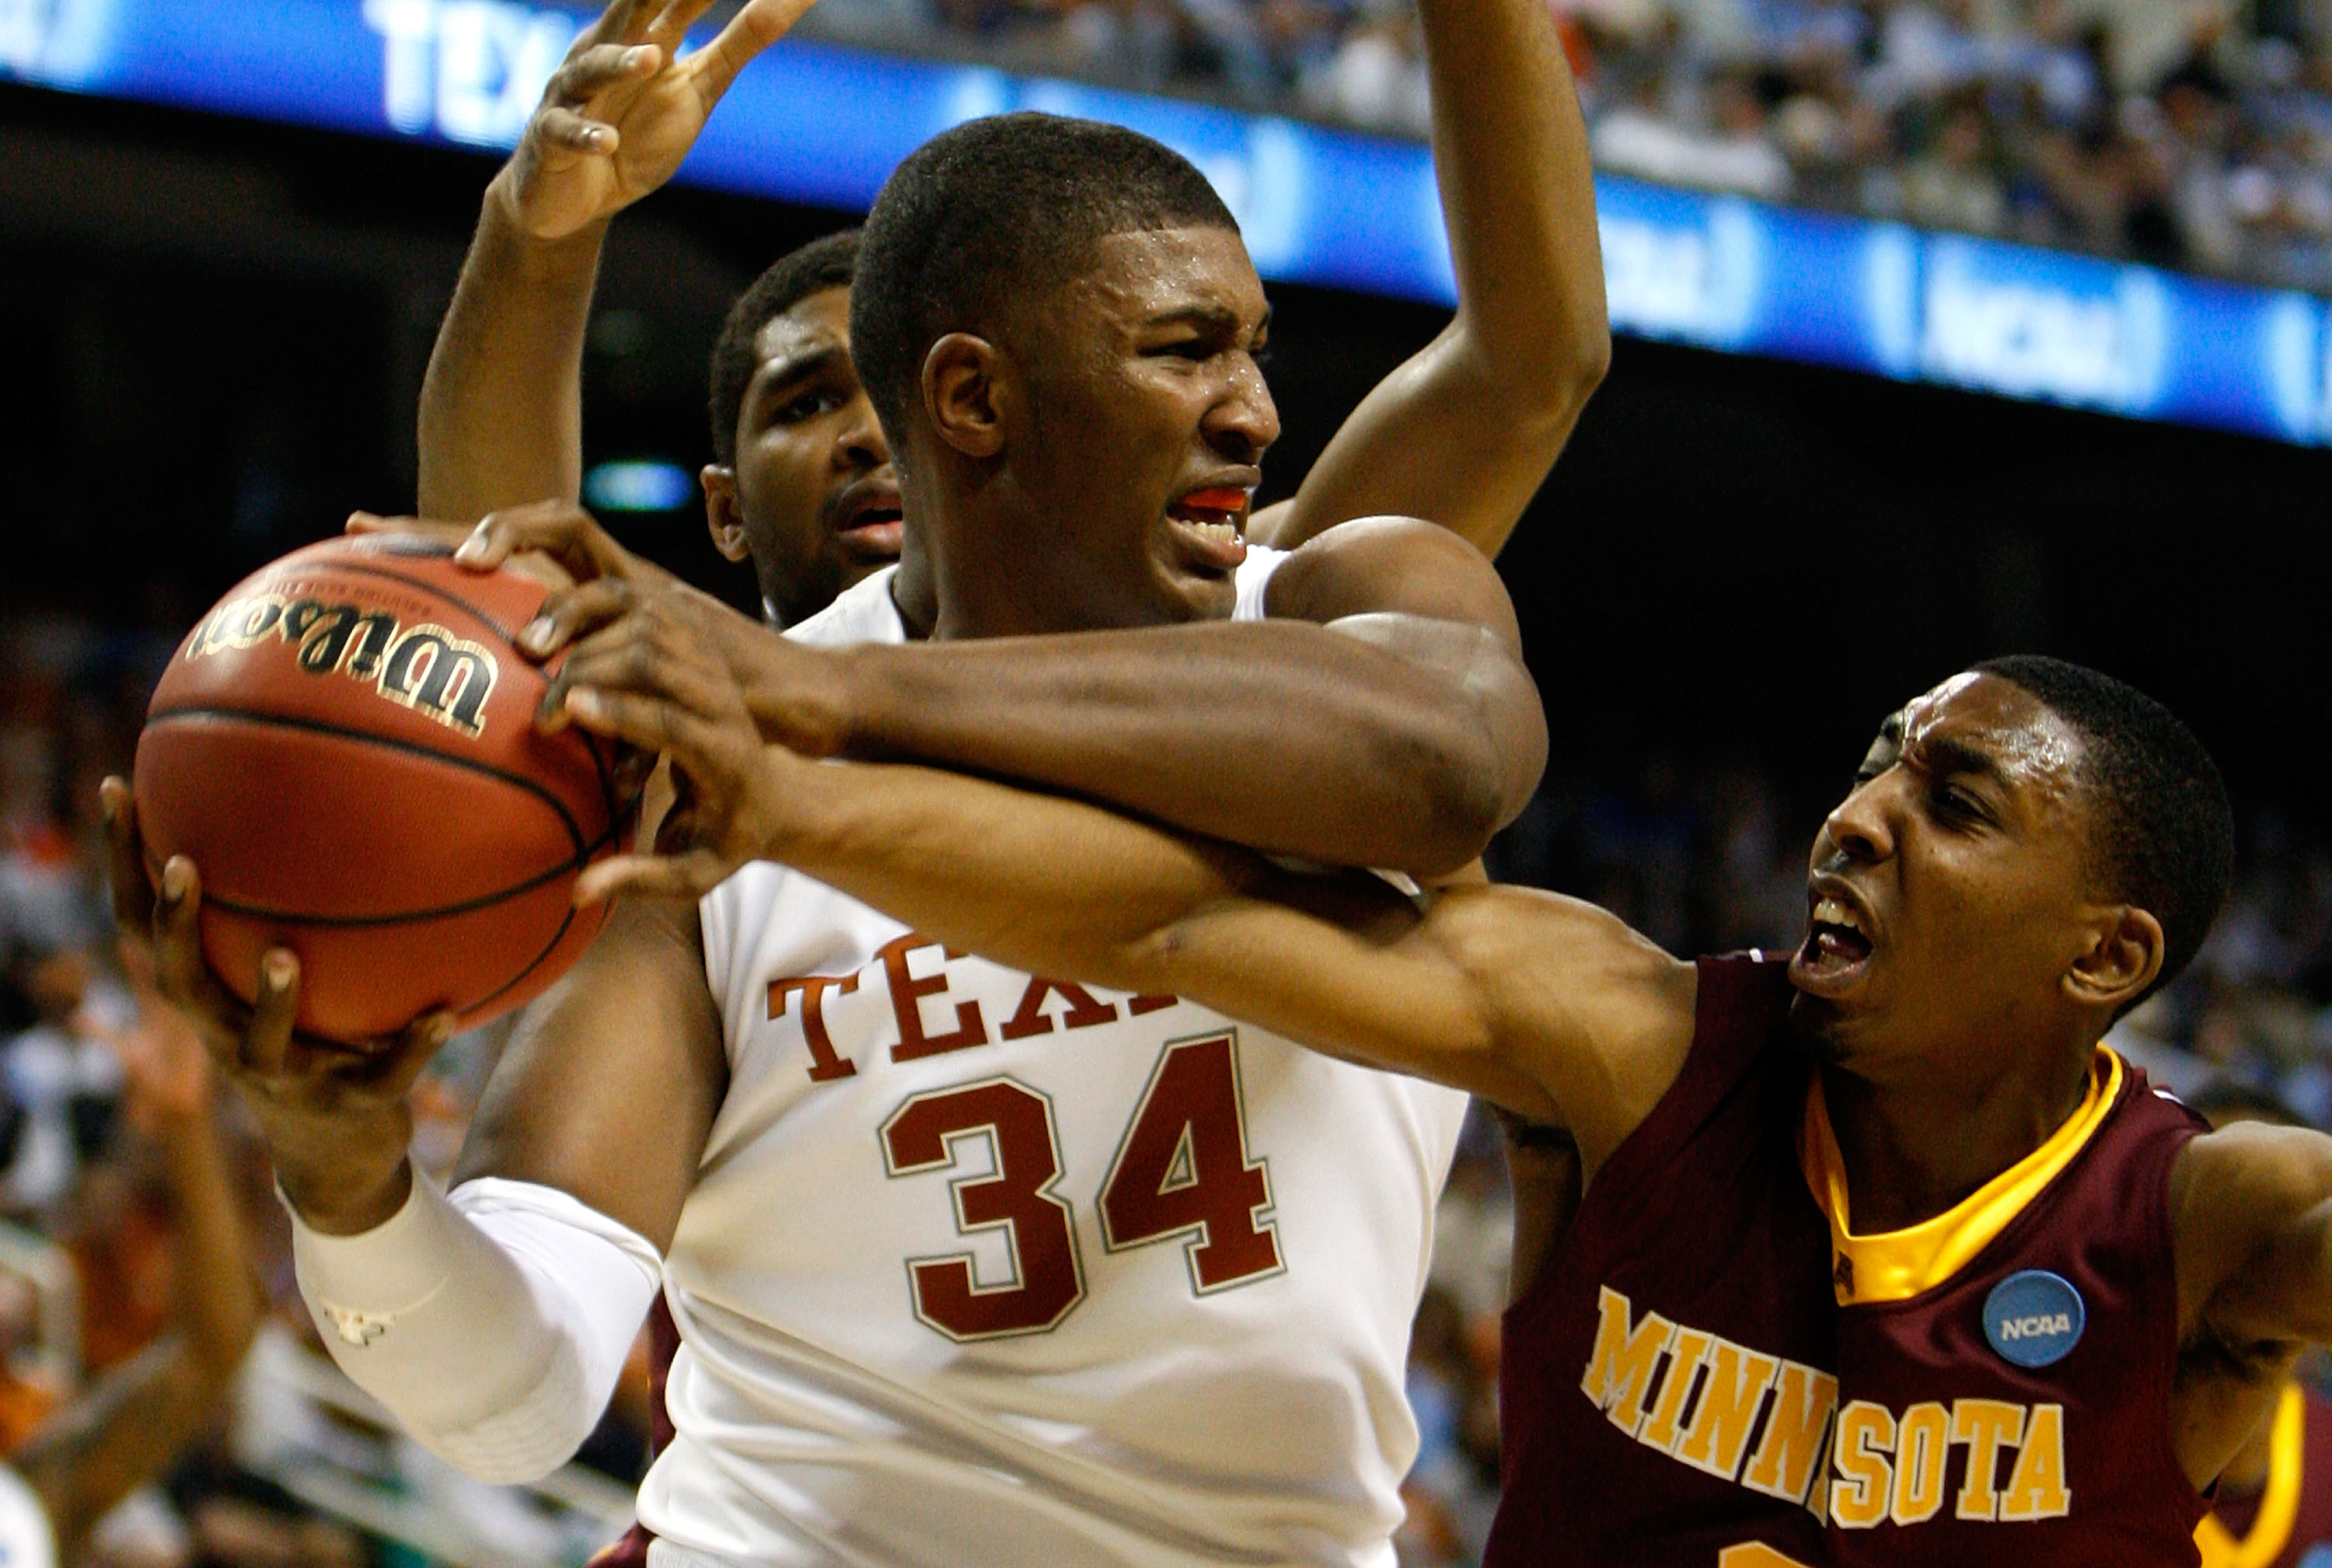 GREENSBORO, NC - MARCH 19:  Al Nolen #0 of the Minnesota Golden Gophers reaches in for a steal against Dexter Pittman #34 of the Texas Longhorns during the first round of the NCAA Division I Men's Basketball Tournament at the Greensboro Coliseum on March